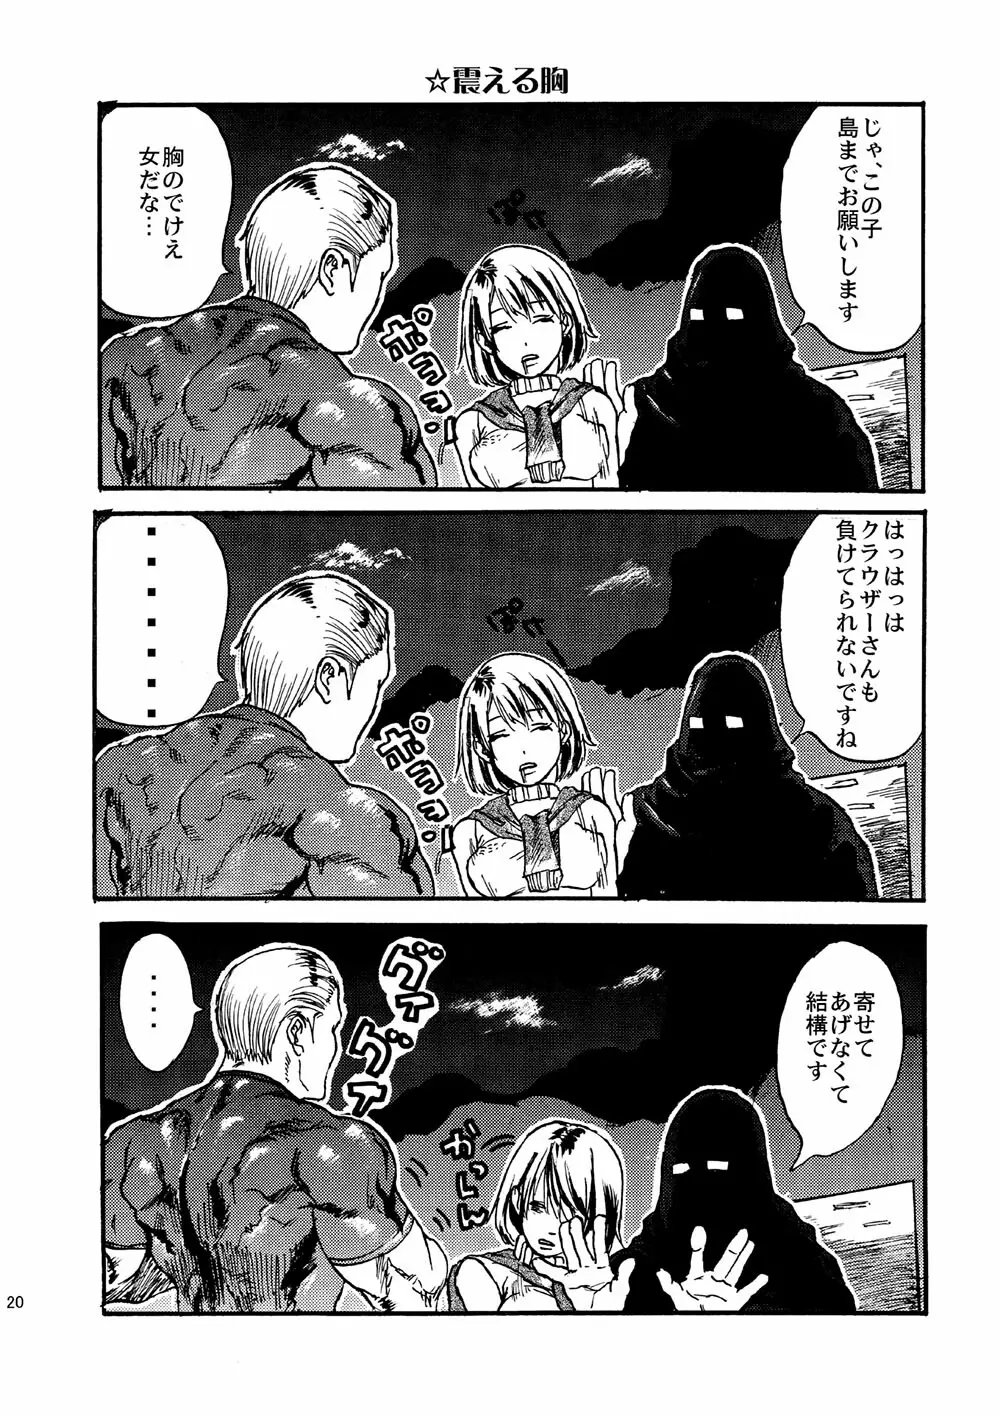 VILLAGE OF FEAR/バイオ４同人誌ｗｅｂ再録 Page.17